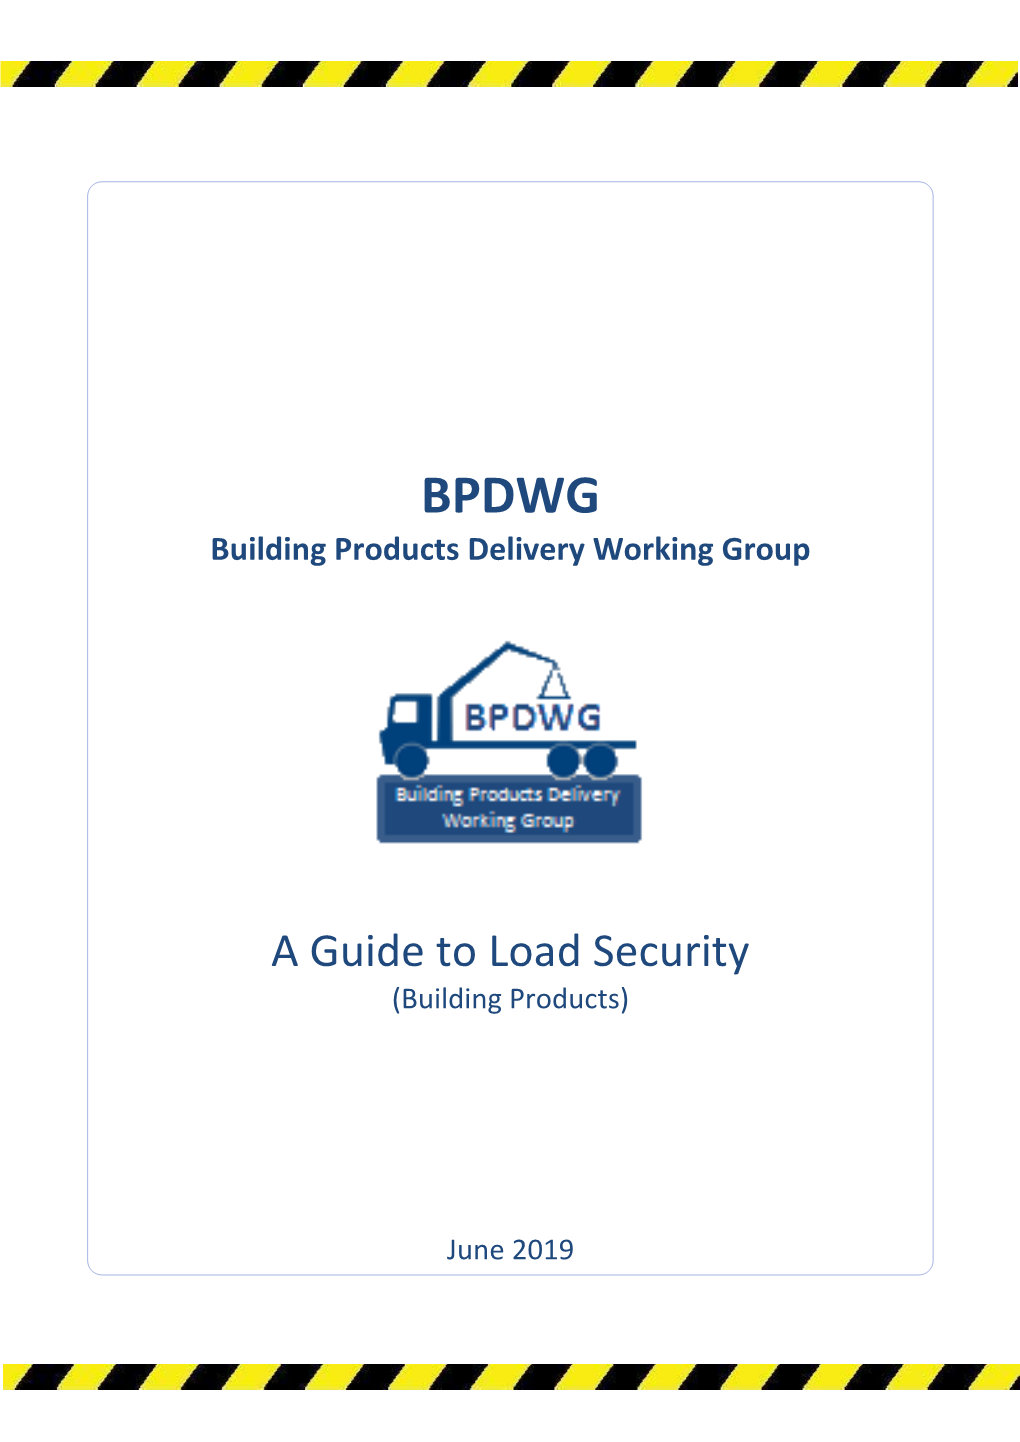 A Guide to Load Security (Building Products)